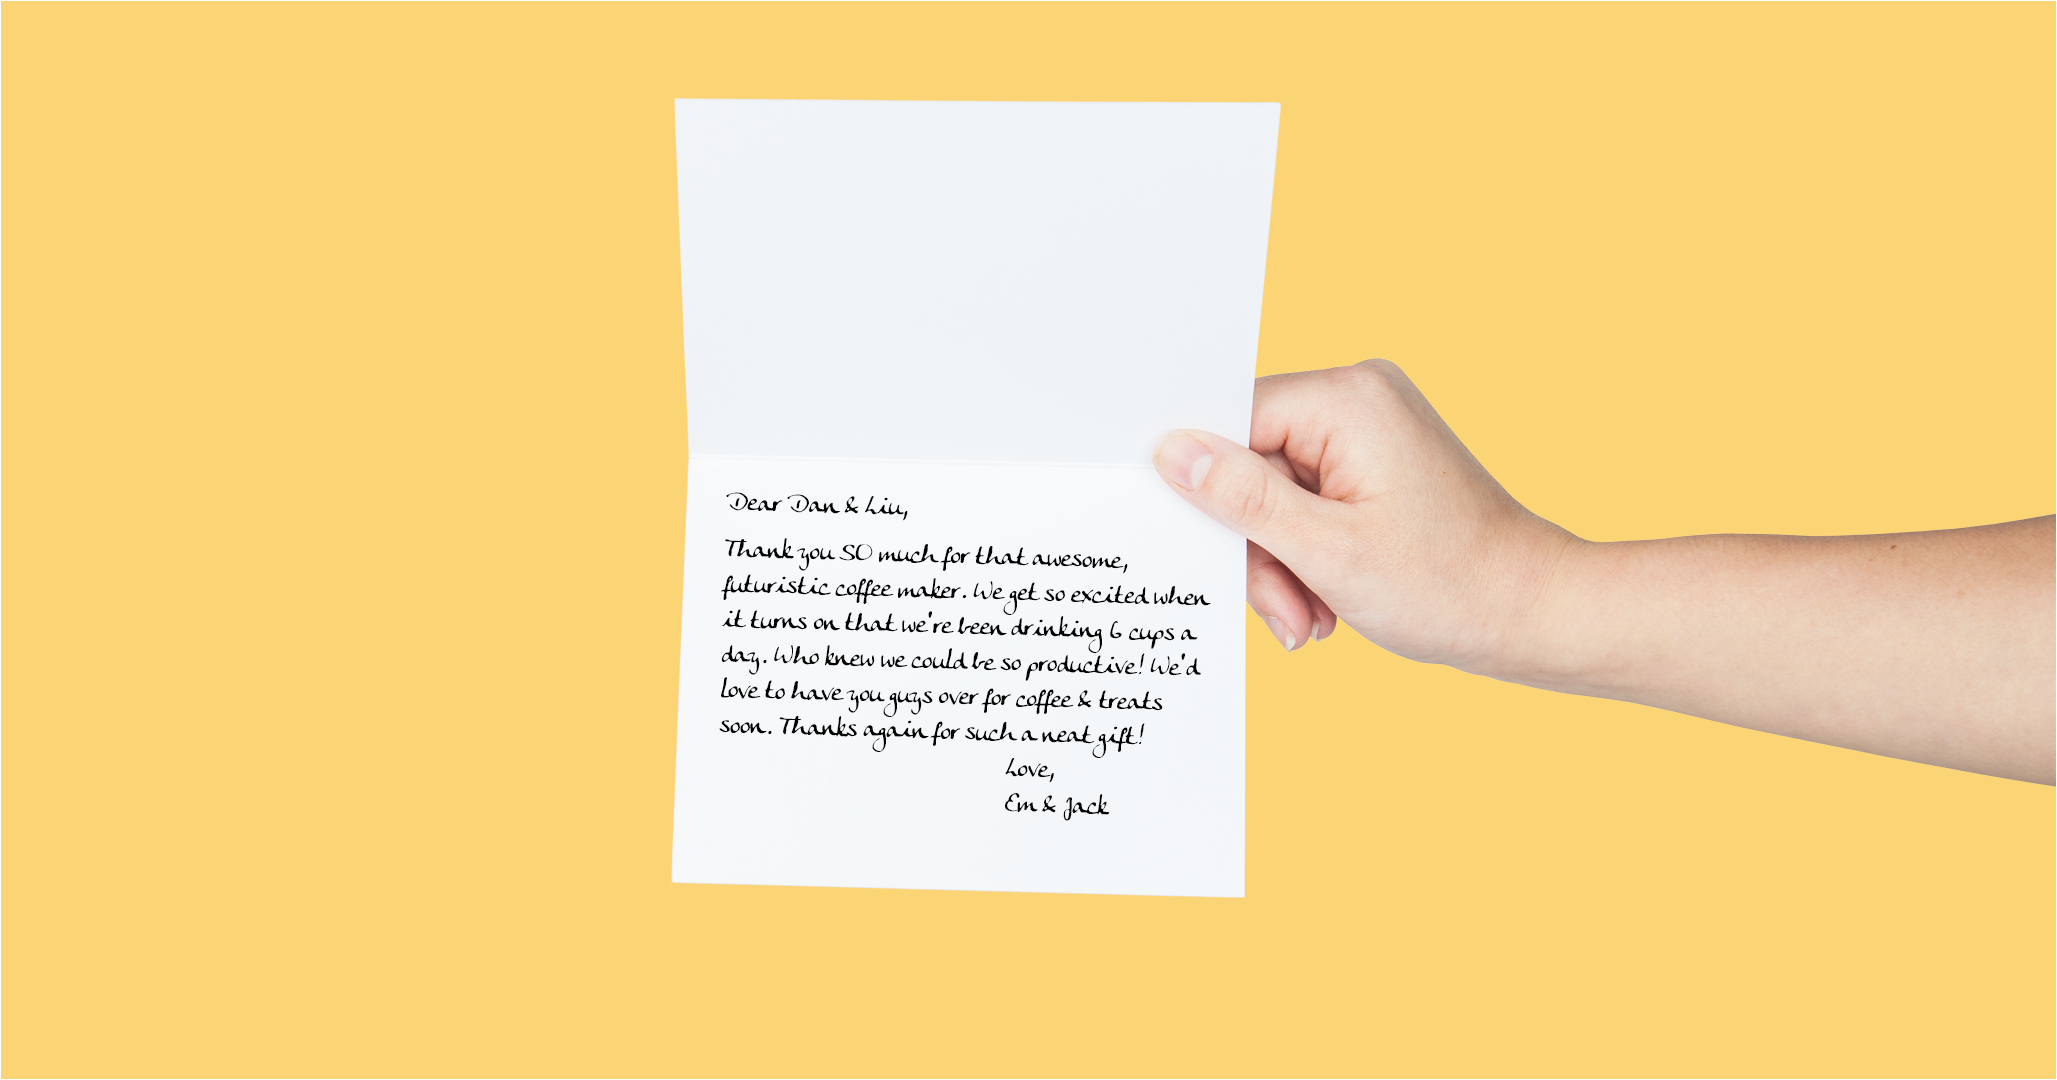 55 ways to sign off a greeting card